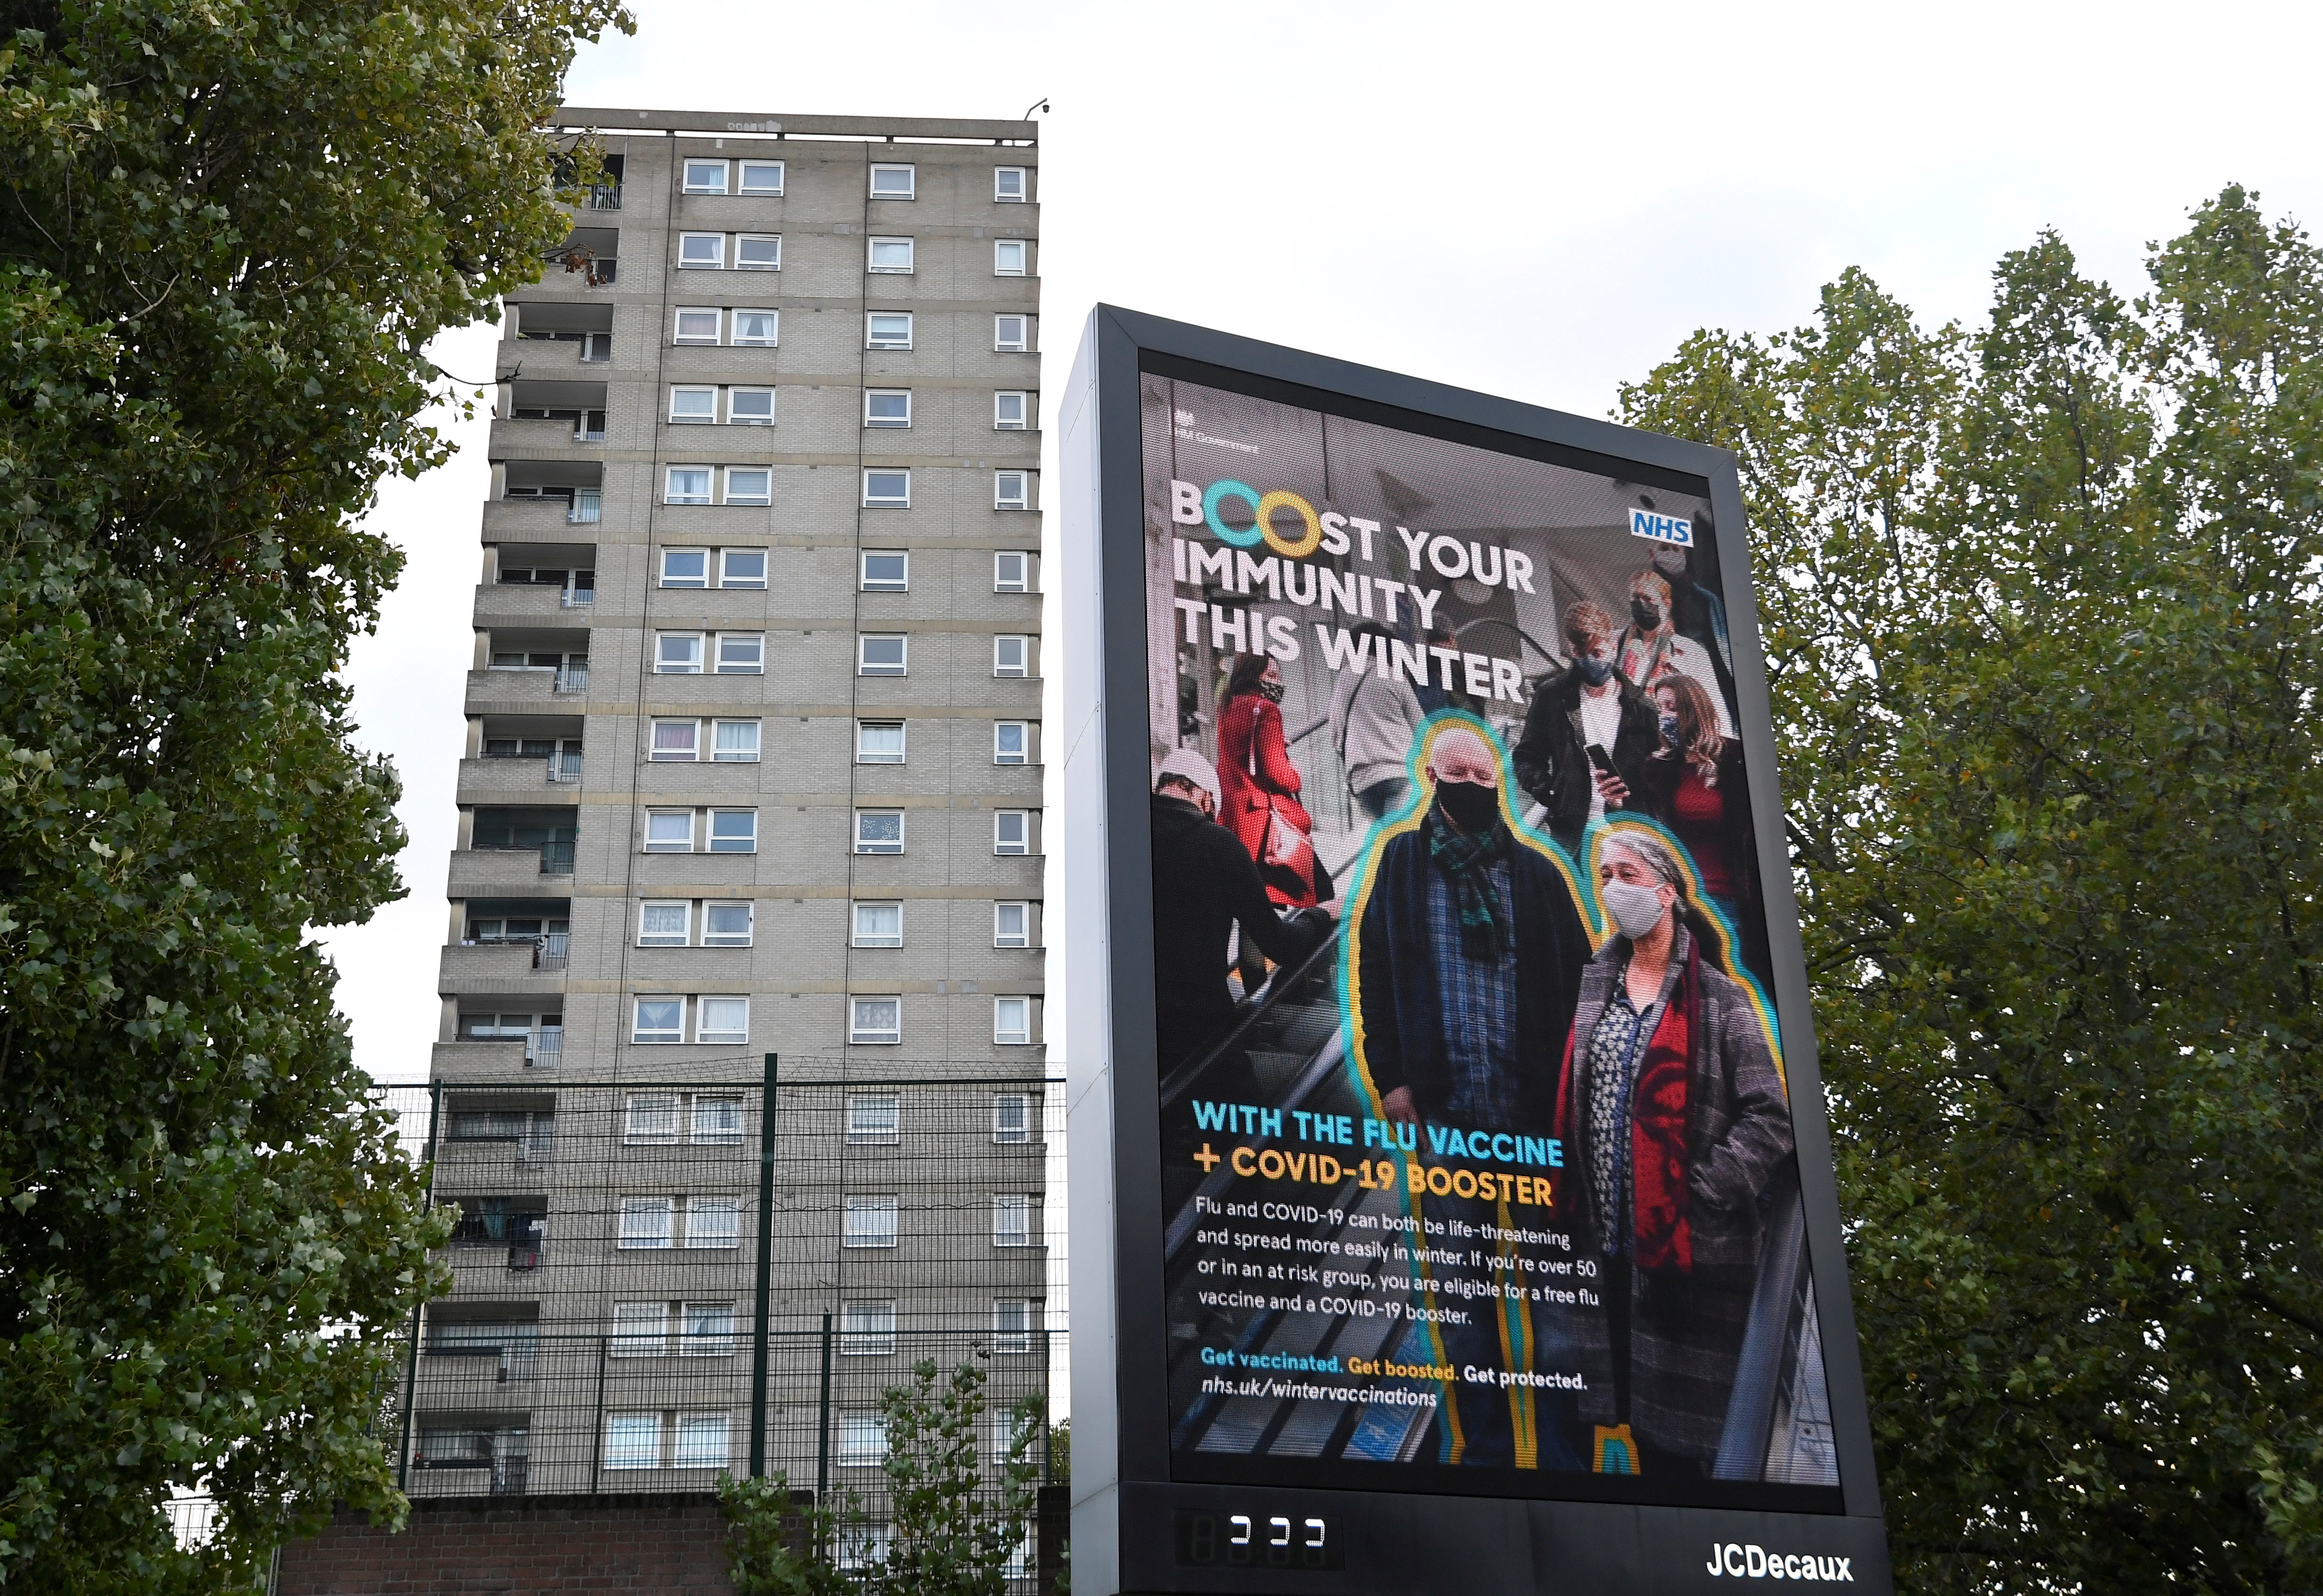 An NHS COVID-19 vaccination health campaign advertisement is displayed near a housing block, amidst the spread of the coronavirus disease (COVID-19), in London